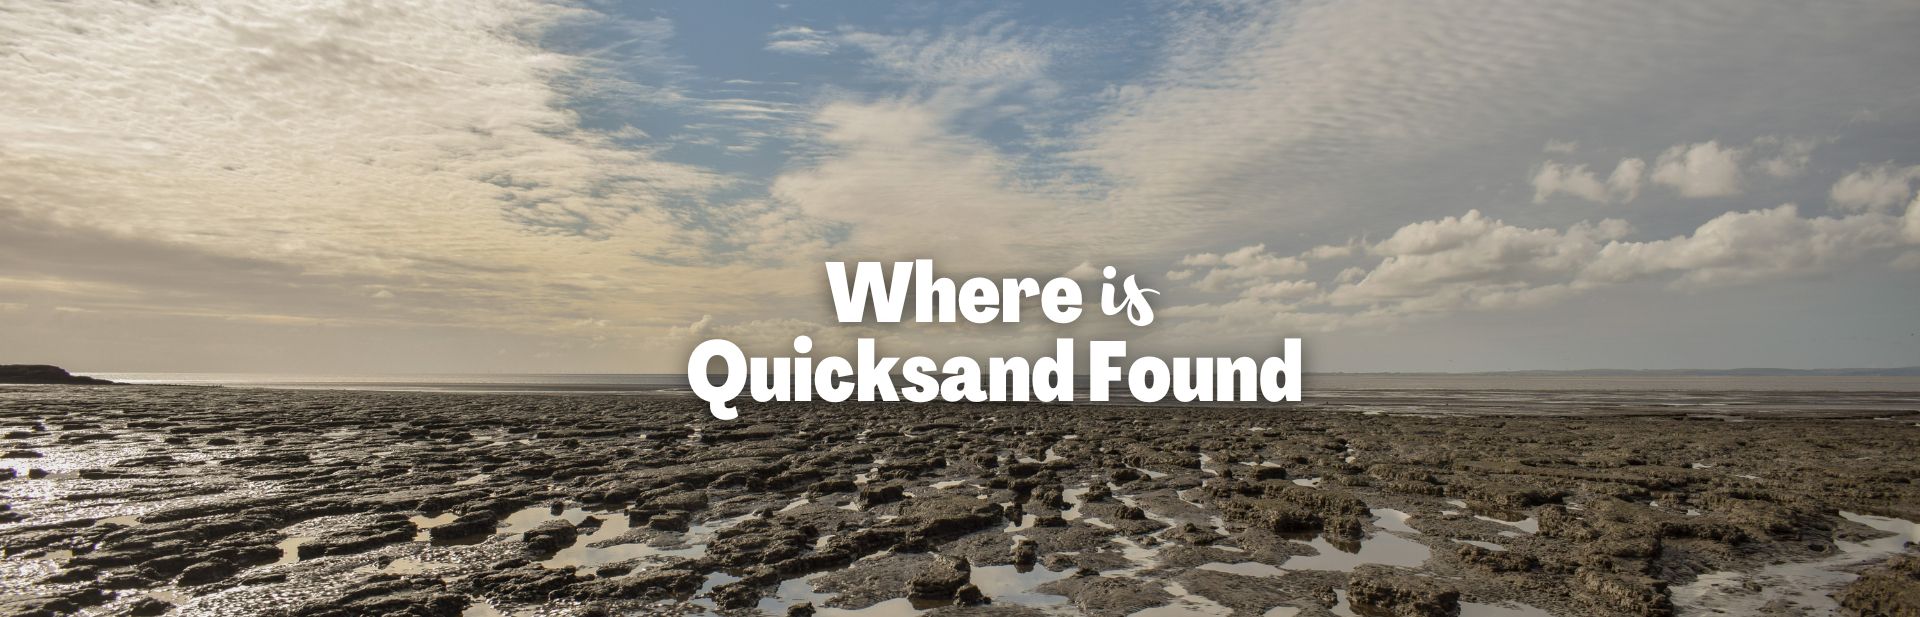 Quicksand Debunked: Where Is Quicksand Found in Reality?